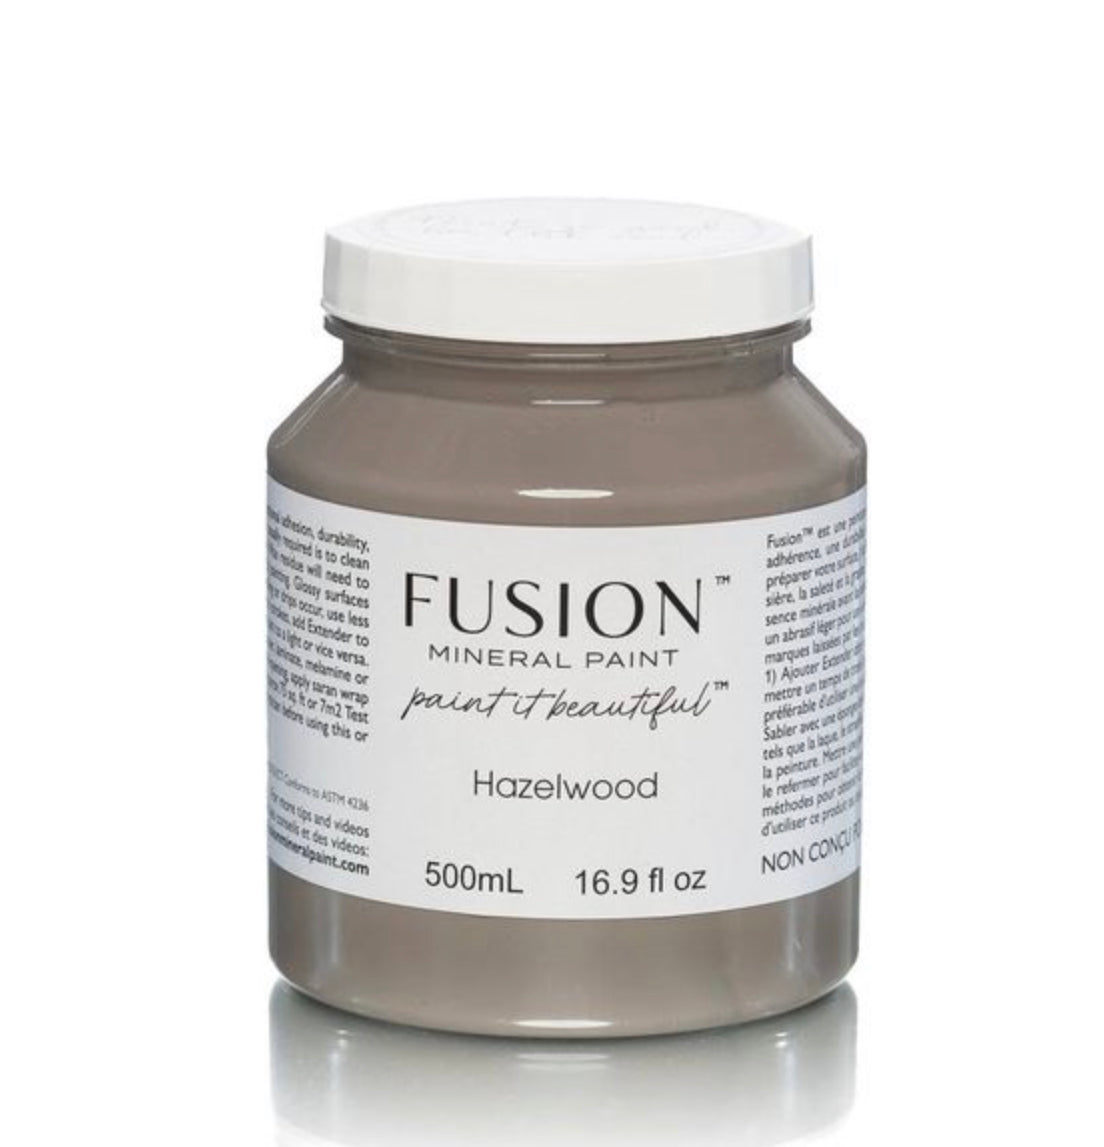 Fusion Mineral Paint - Hazelwood New Release 2021!